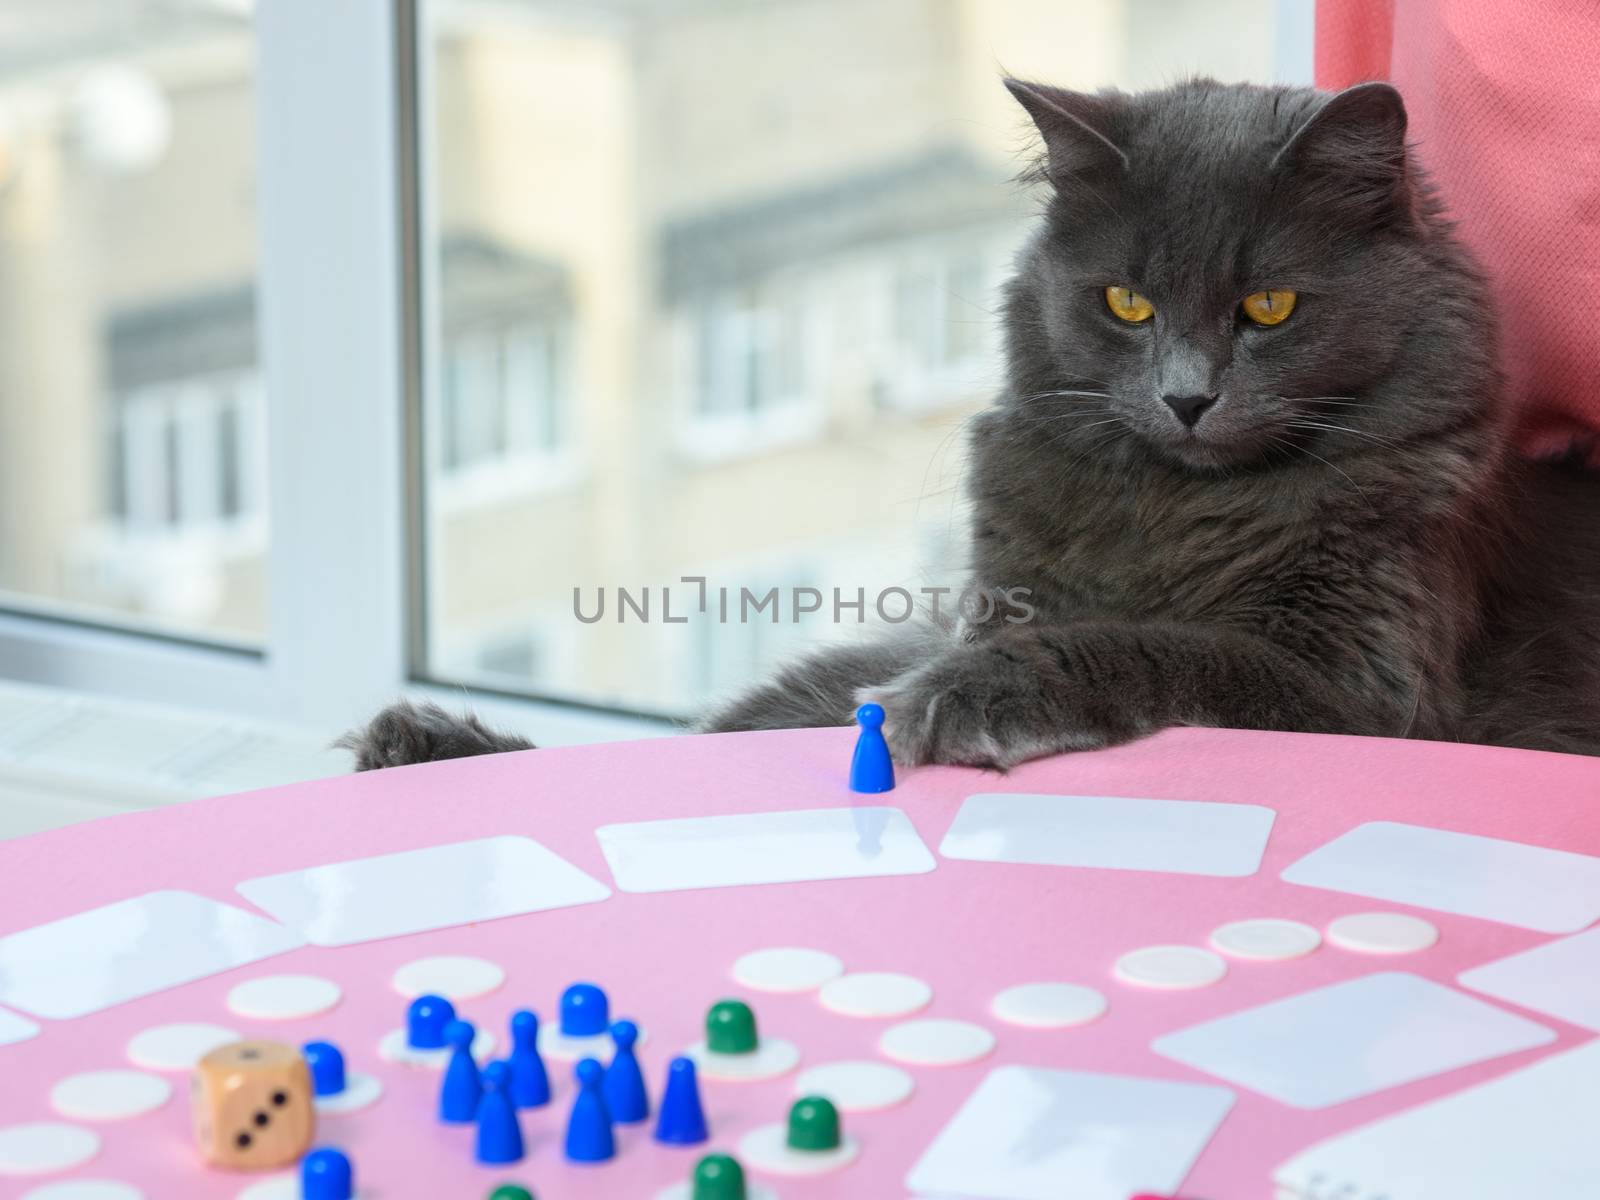 Domestic cat watches as they play a board game at the table by Madhourse